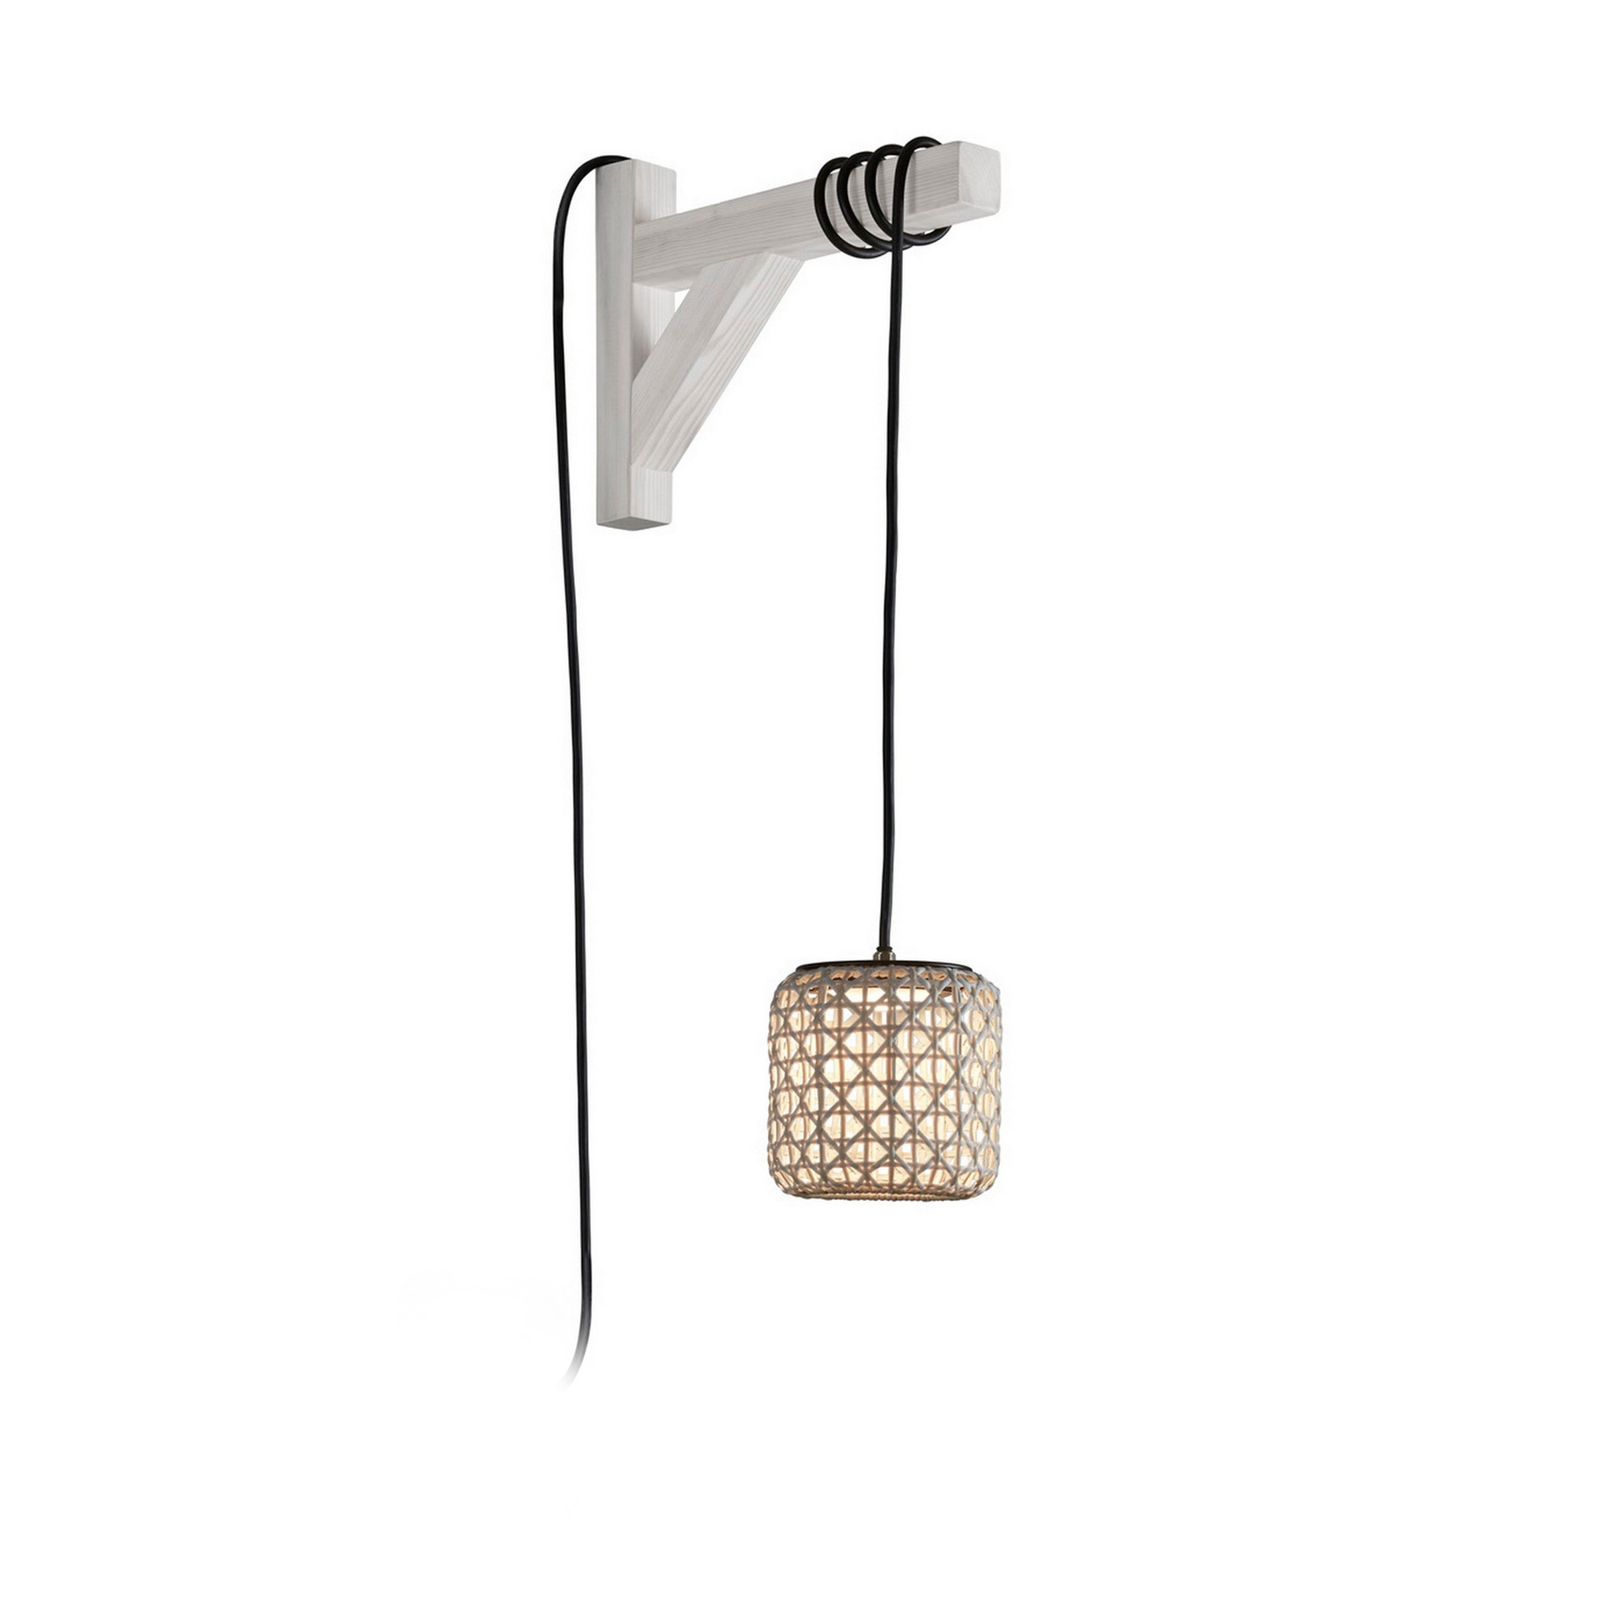 Bover Nans S/16/H Candeeiro suspenso LED, ficha, bege